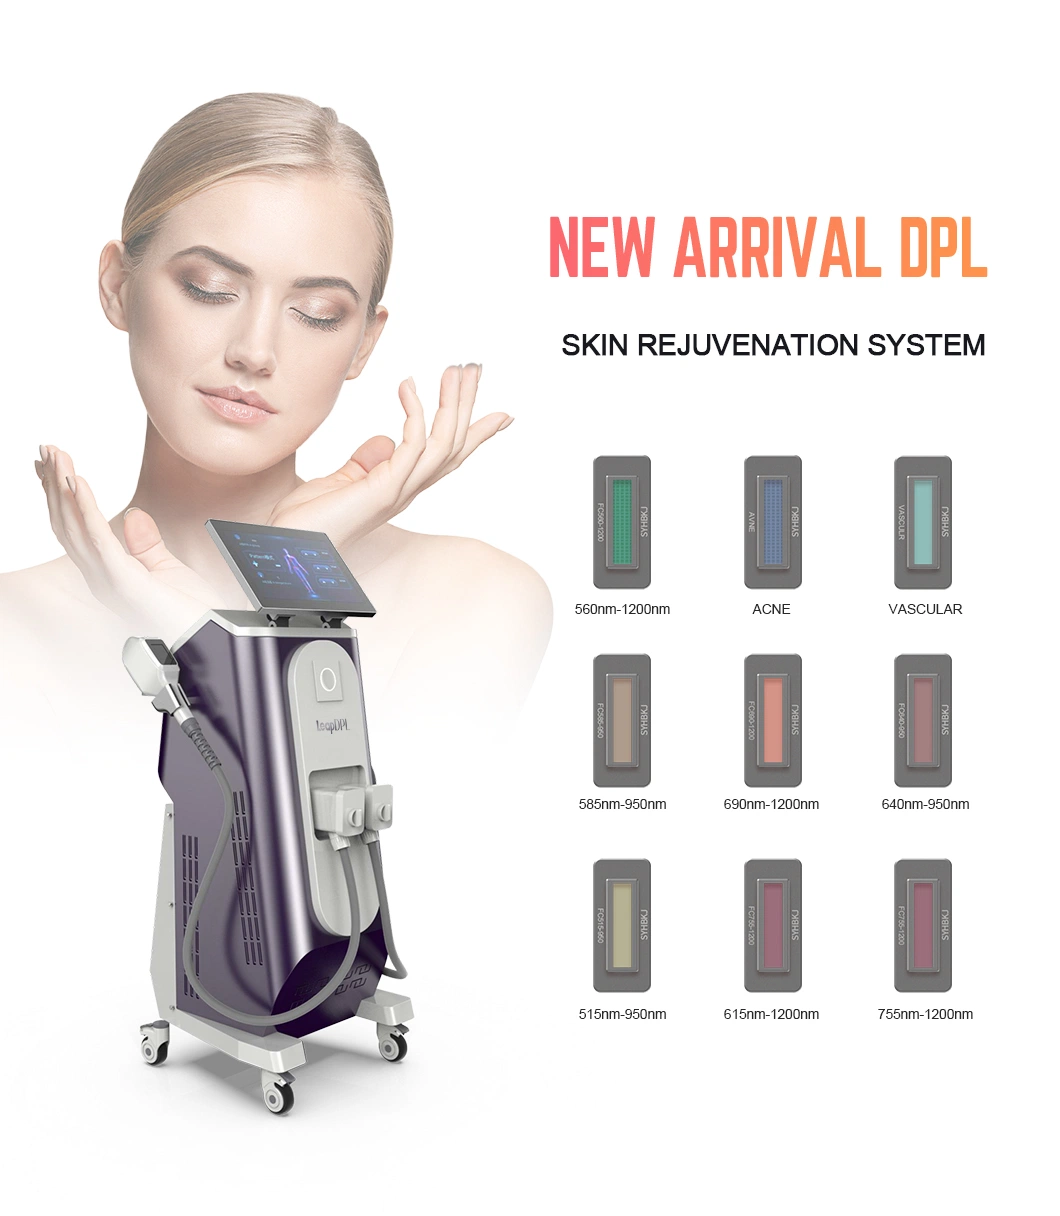 Dpl IPL Shr Laser Nail Guns Skin Care Products with Price LED Face Skin Care Light Machine